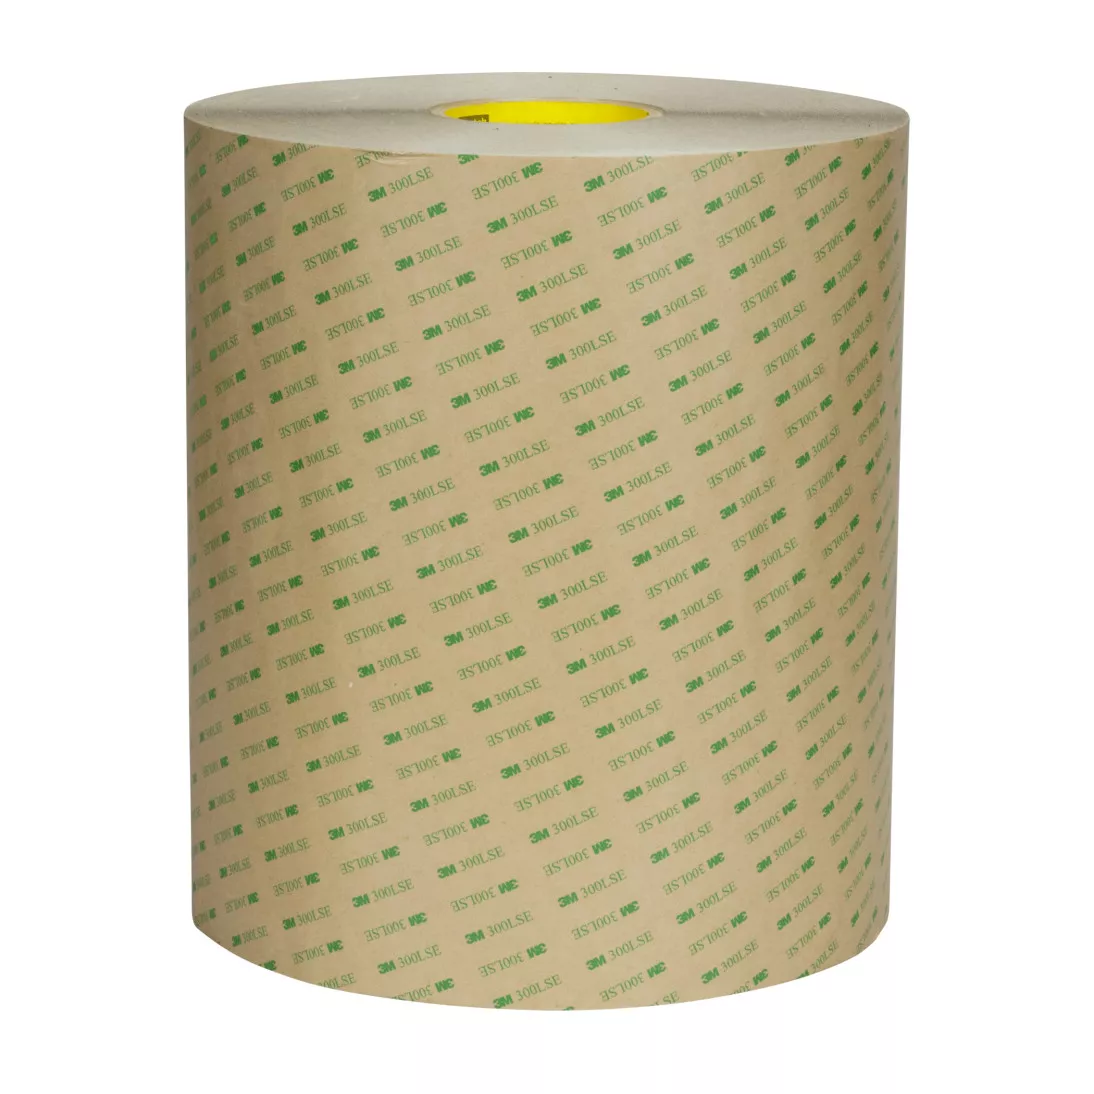 3M™ Double Coated Tape 93020LE, Clear, 54 in x 360 yd, 7.9 mil, 1 roll
per case